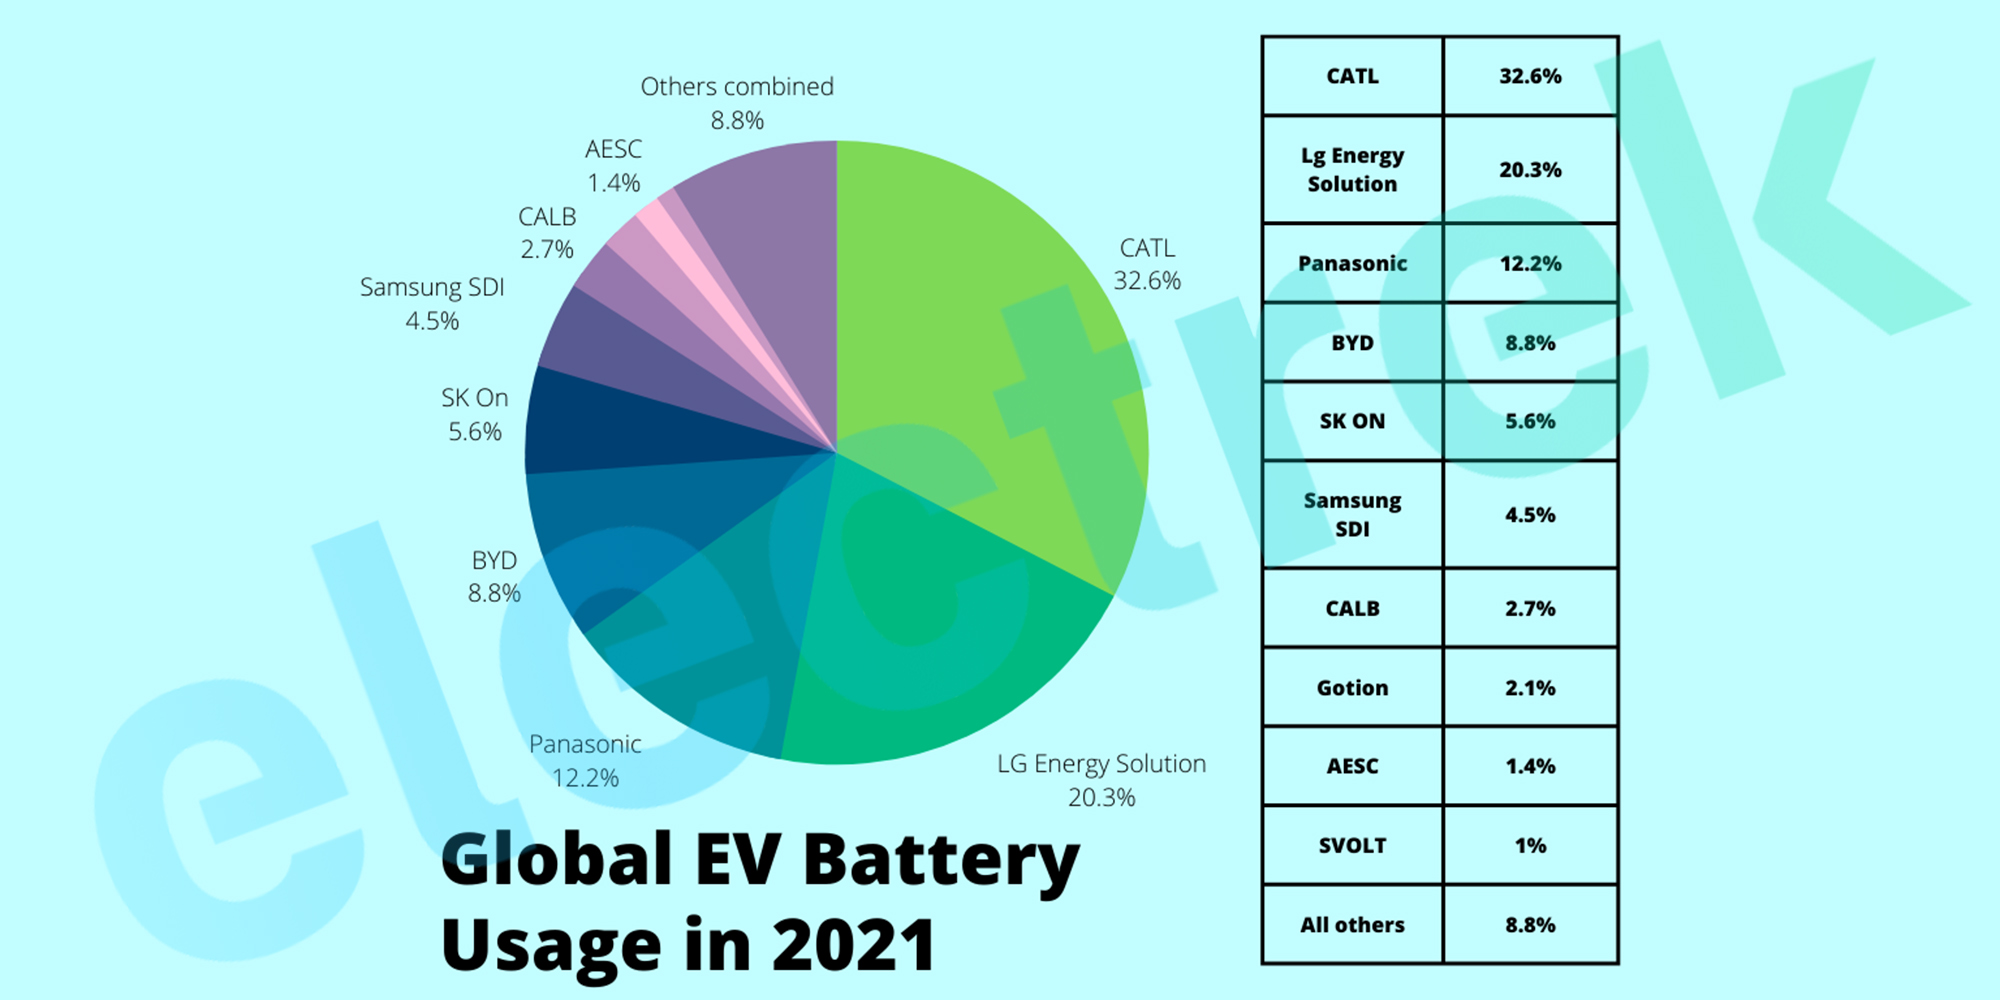 CATL continues reign as the world's largest EV battery manufacturer for